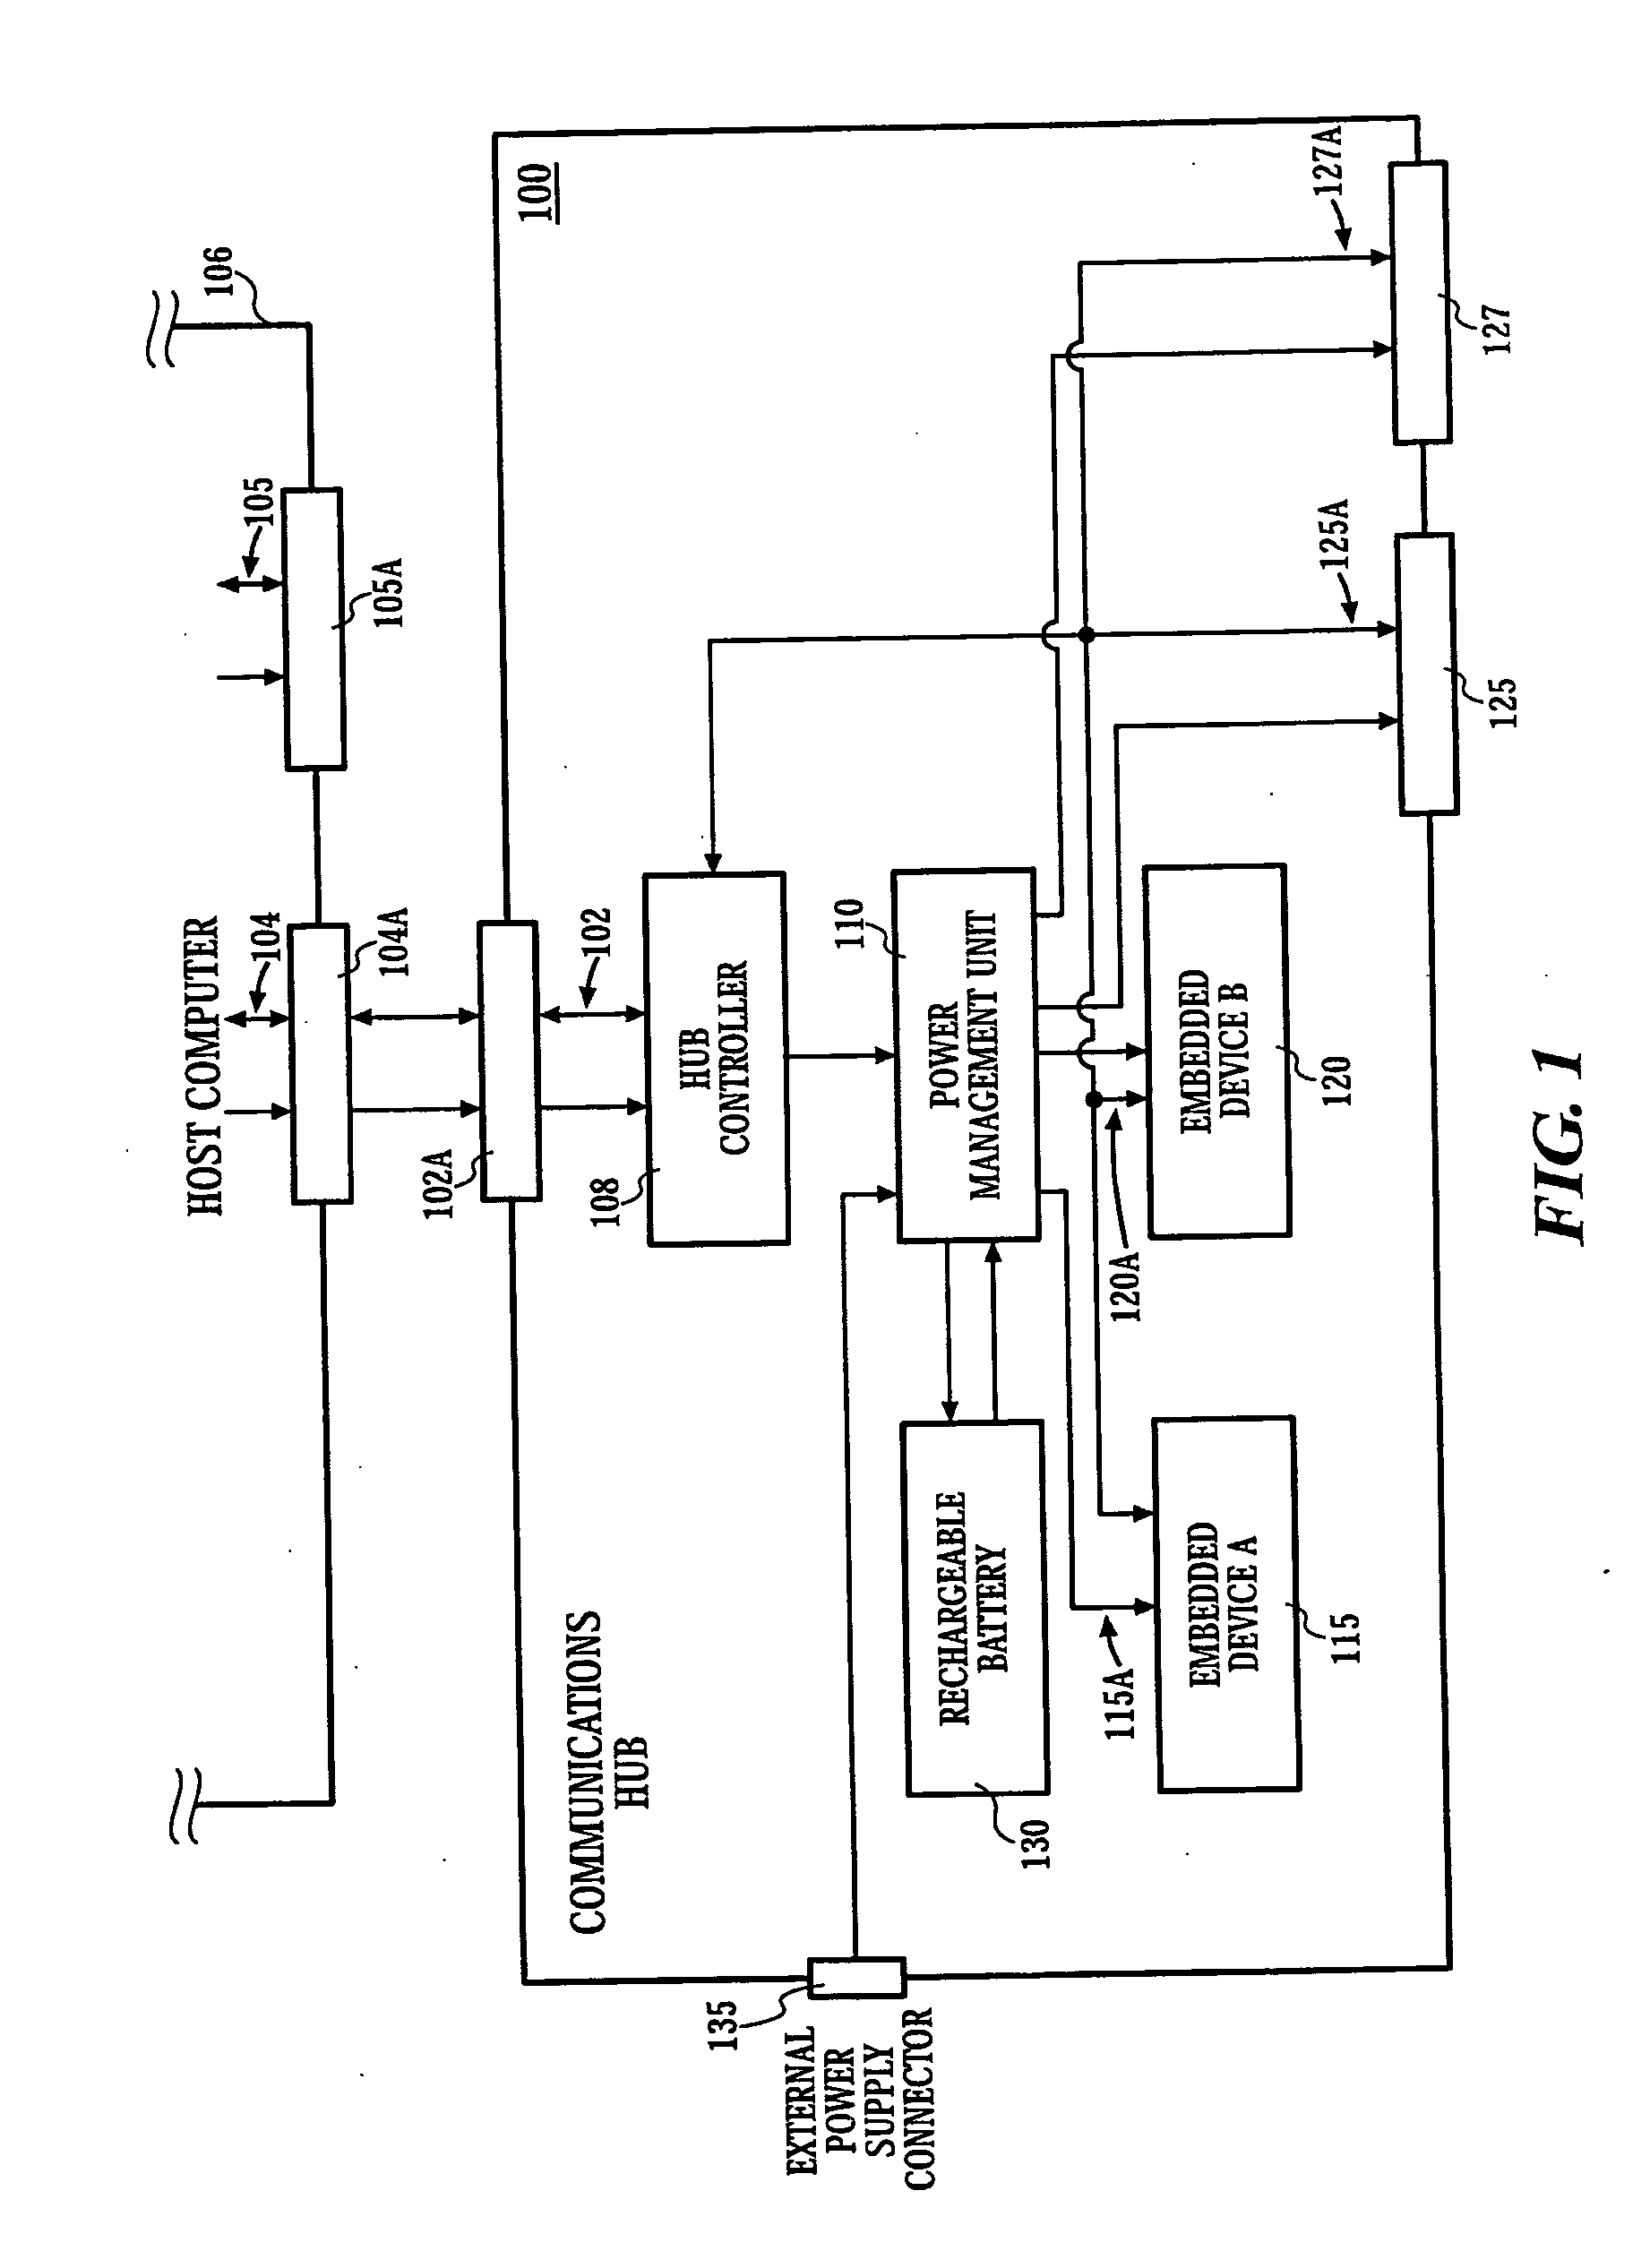 Method and apparatus for a communication hub